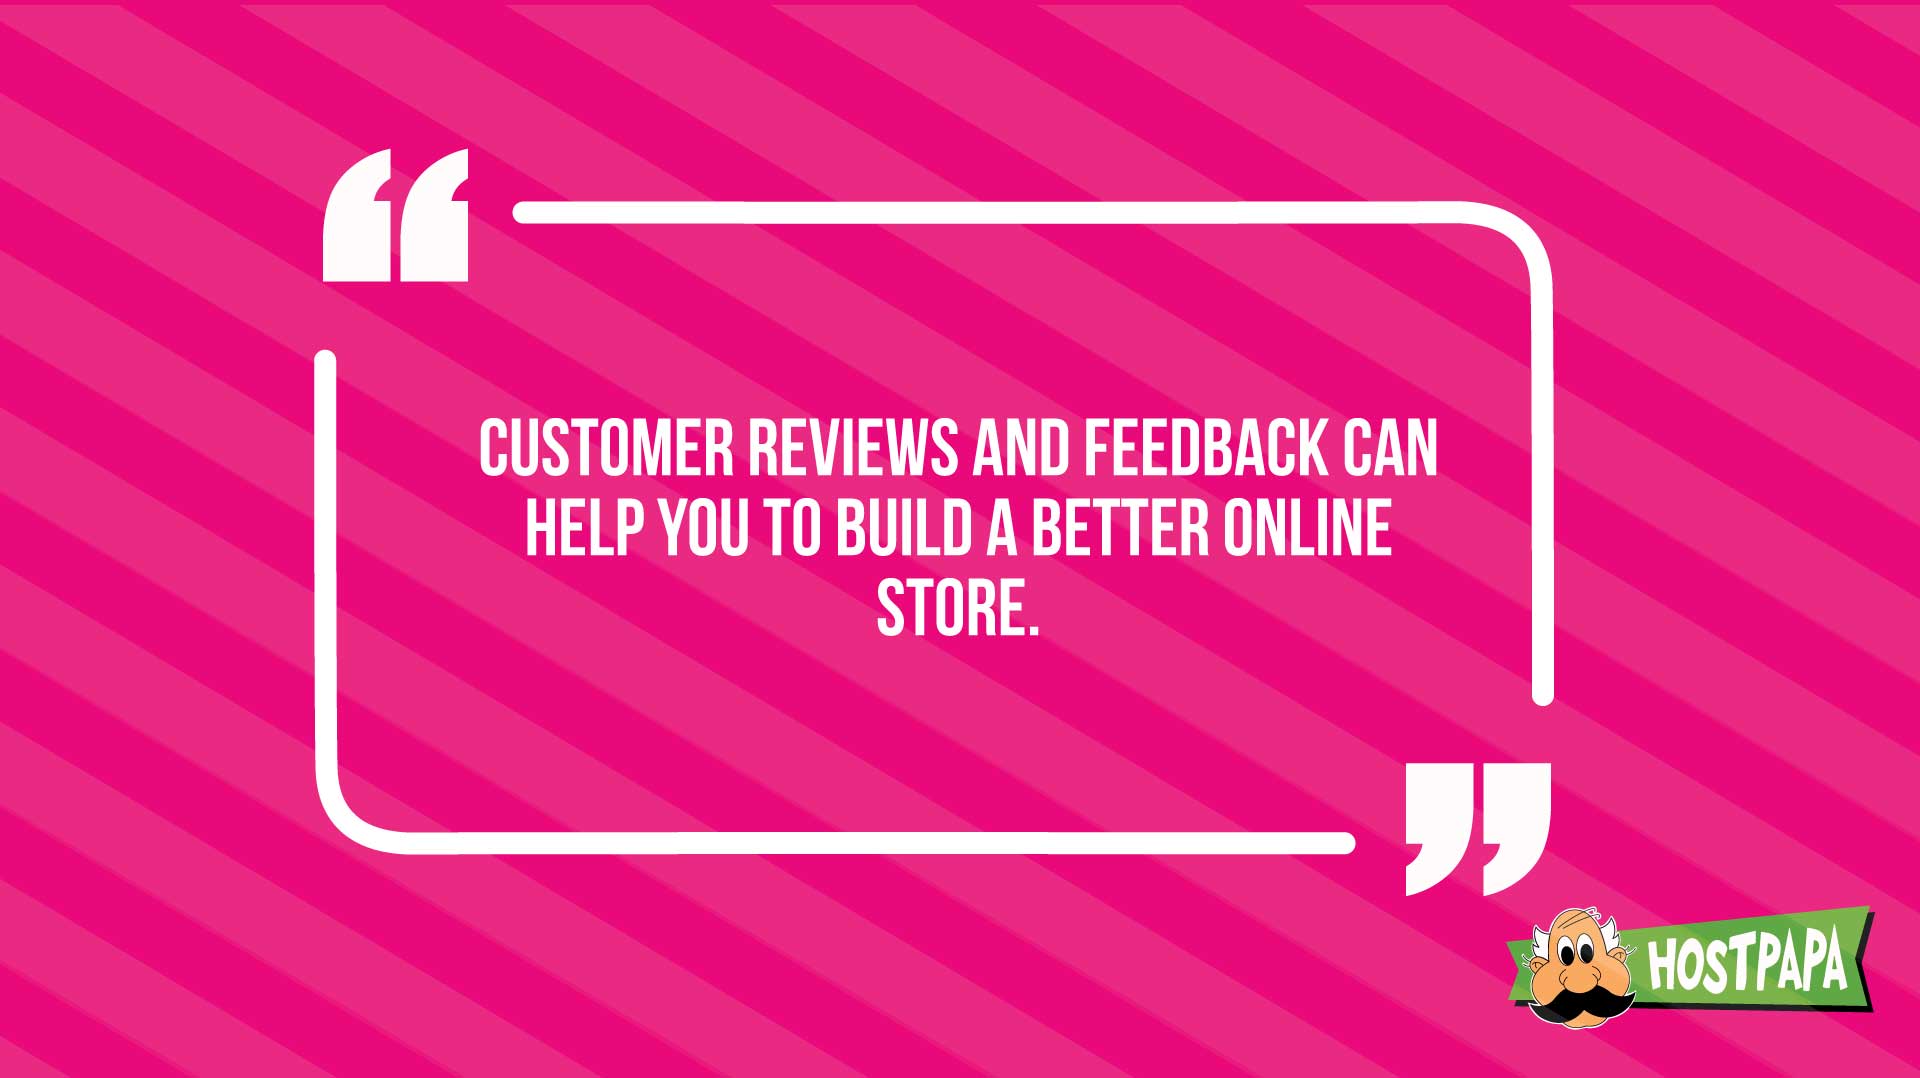 Customer reviews can help you to build a better online store